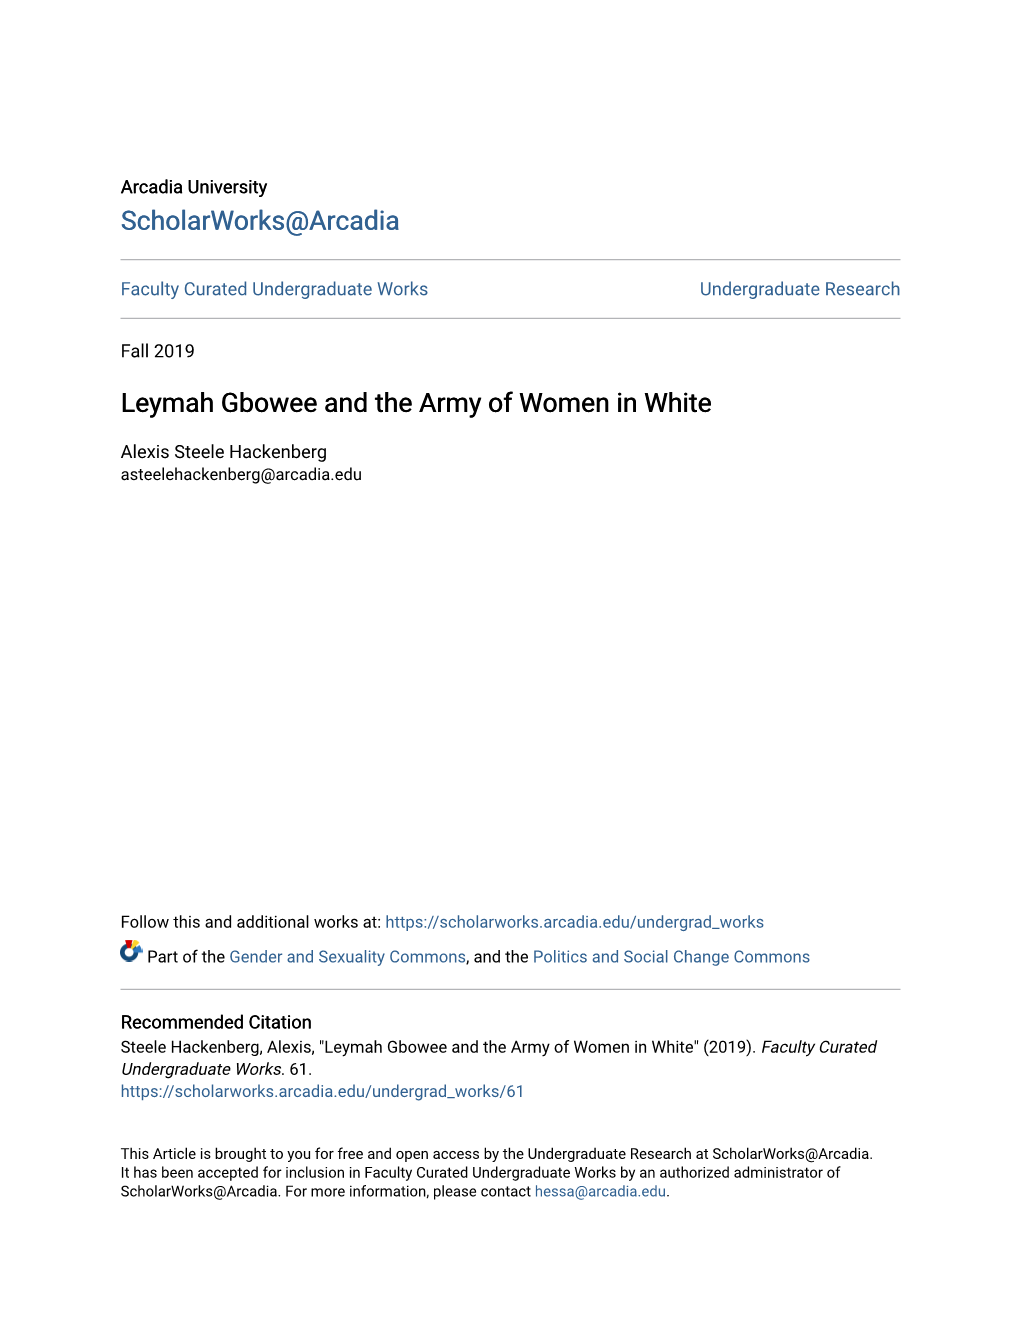 Leymah Gbowee and the Army of Women in White